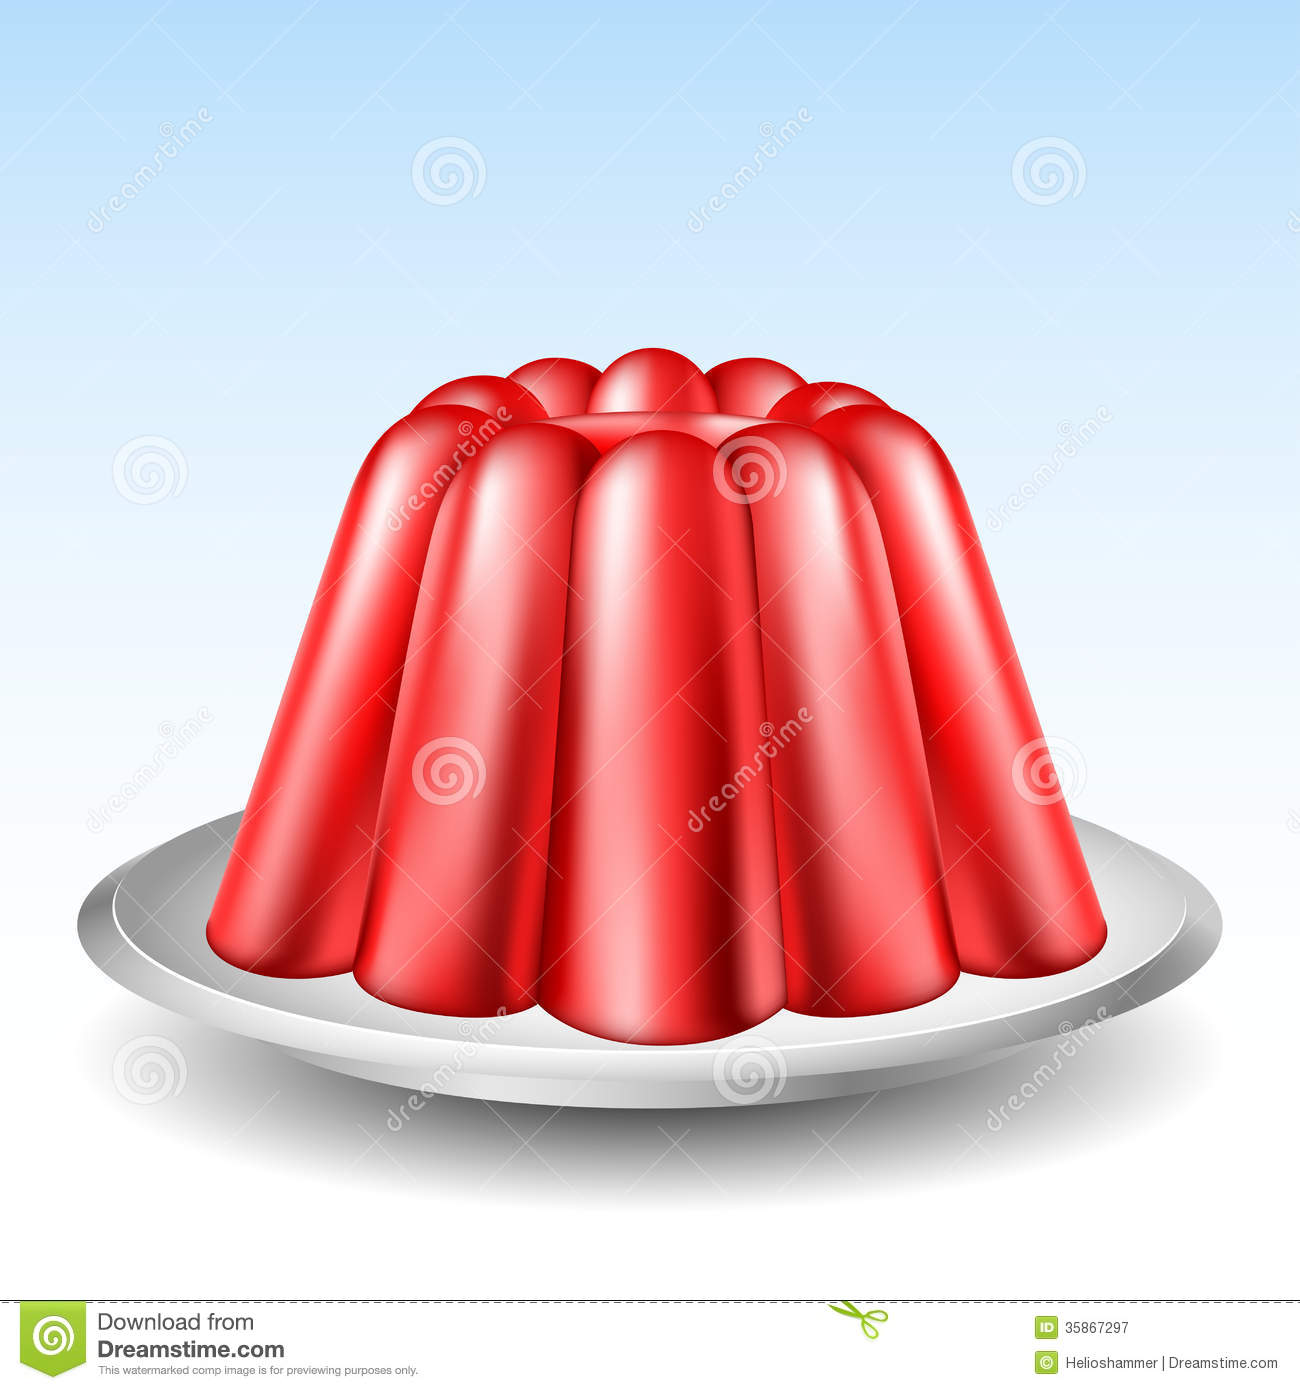 clipart of jelly - photo #36